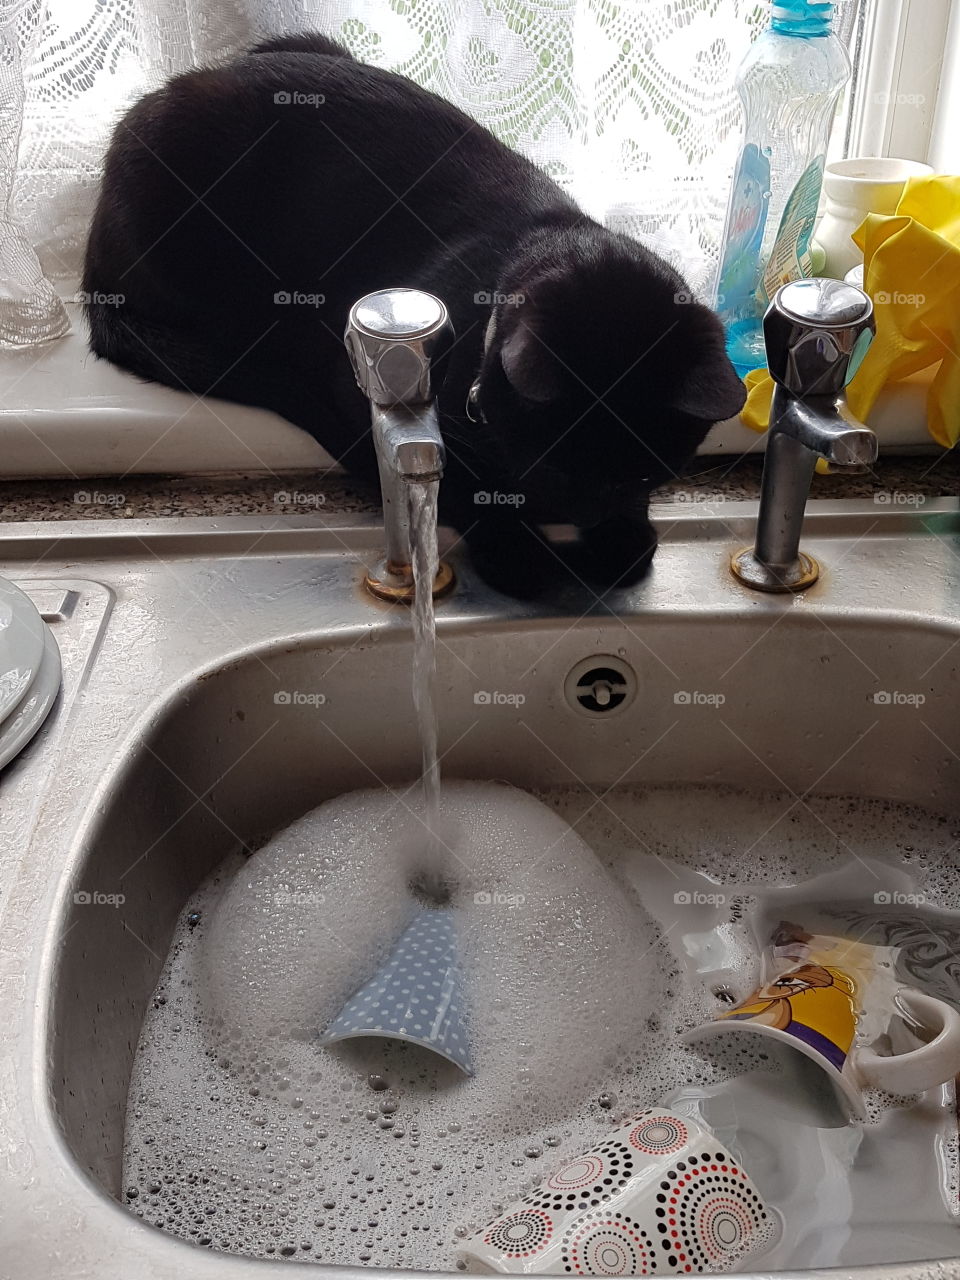 Foo kitten occupying himself with a tap and some clear fluid..water 🤣